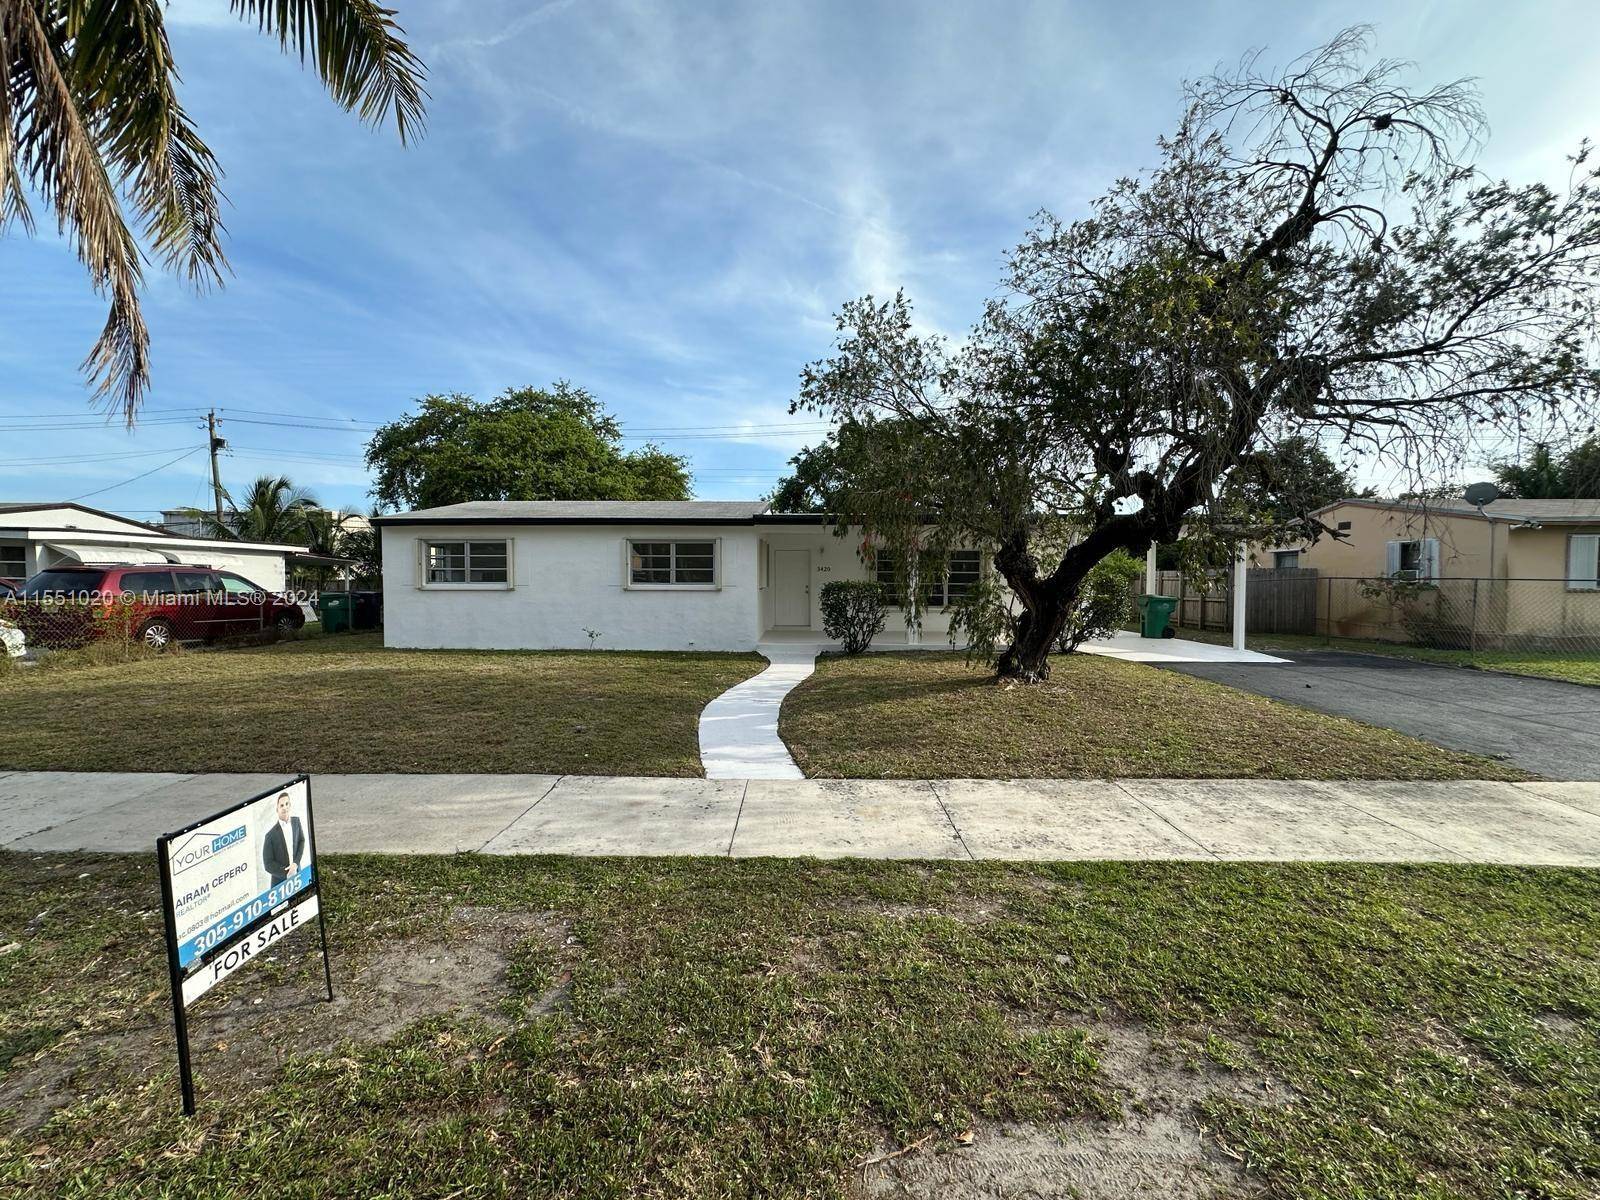 Completely remodeled property in a great and growing neighborhood, perfect for first time buyers and also for investment.